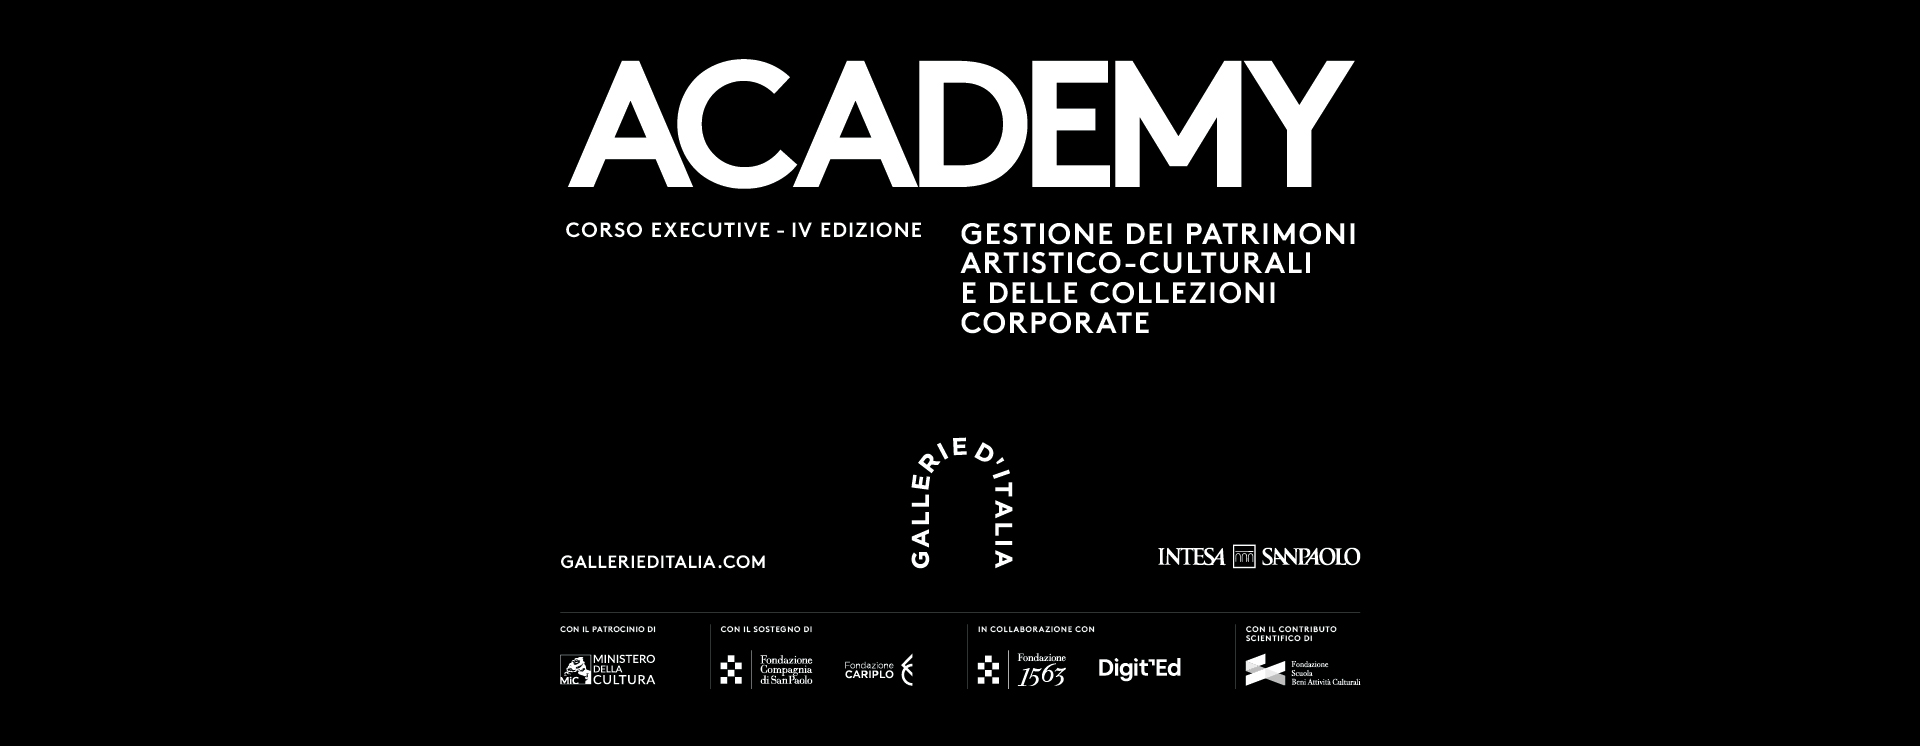 Gallerie d’Italia Academy. The fourth edition of the executive "Management of artistic-cultural heritage and corporate collections" training course